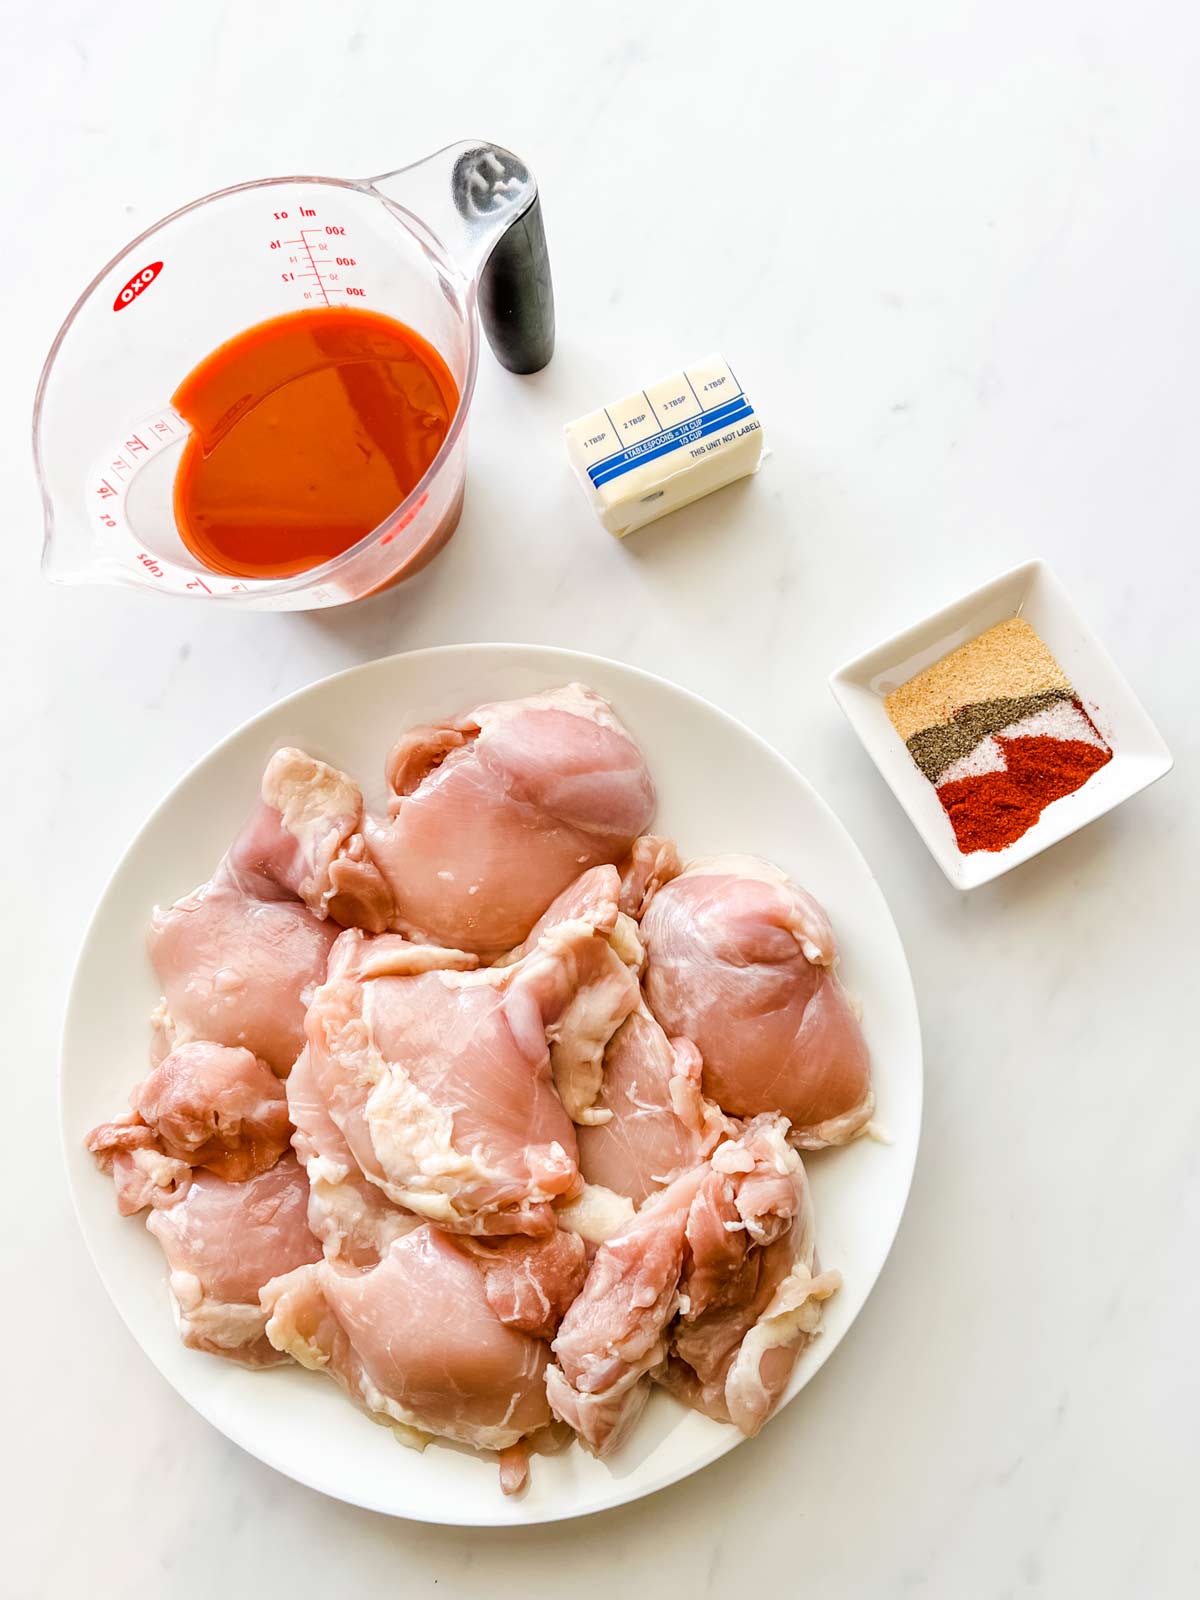 Oerhead photo of chicken thighs, buffalo sauce, butter, and seasonings in prep bowls.